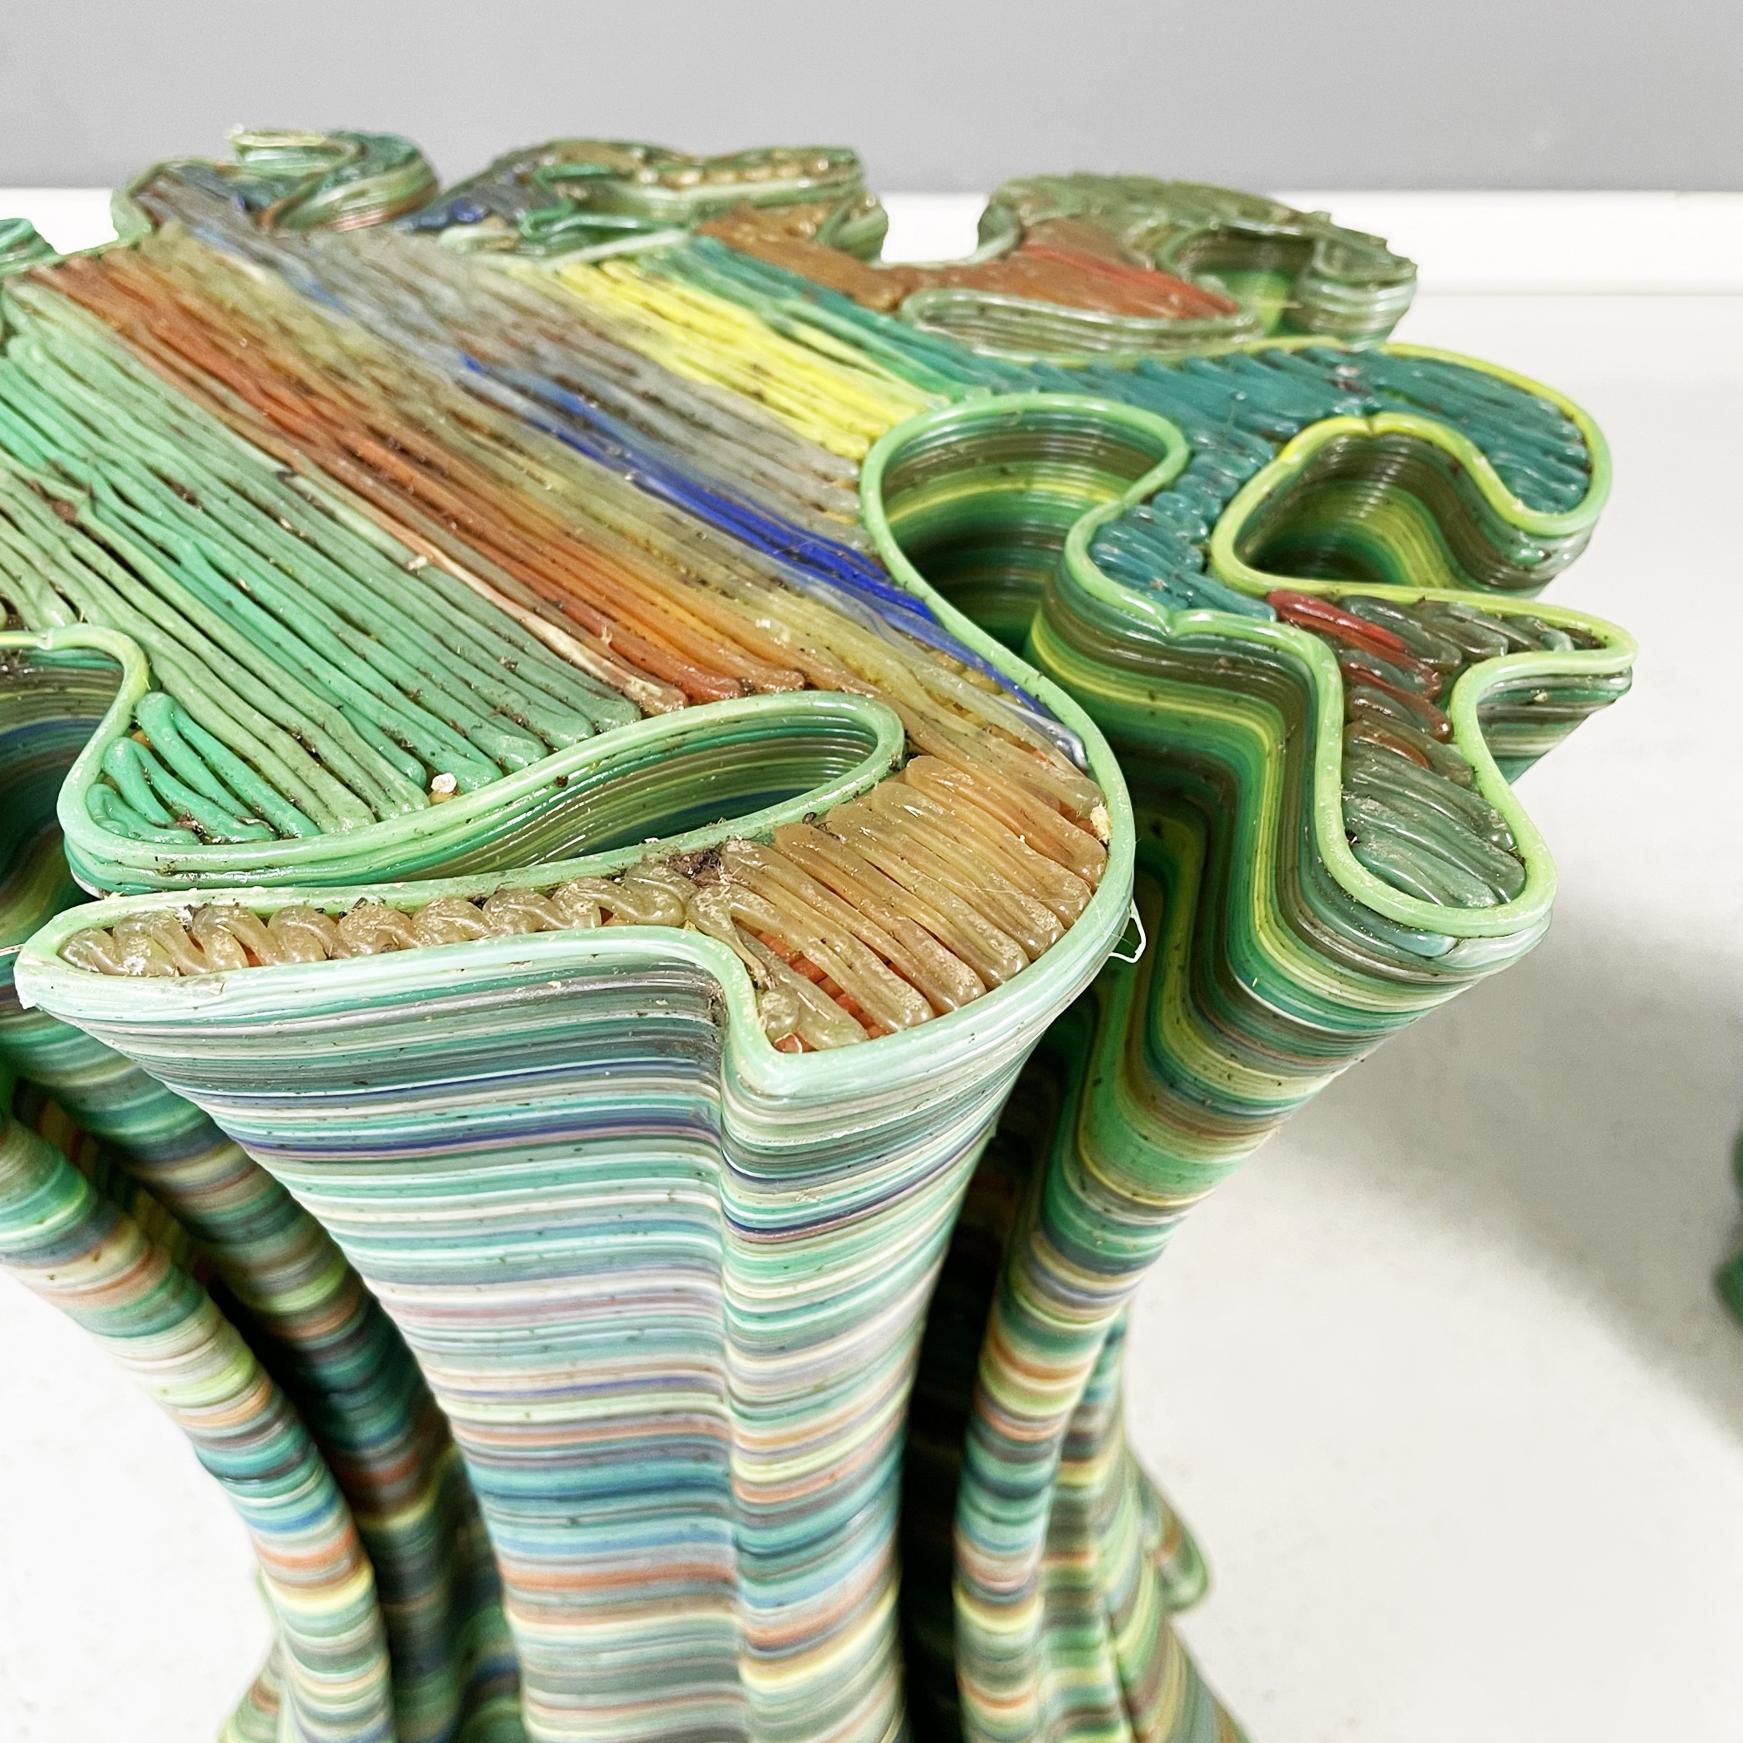 Contemporary Italian post-modern Garden stools or coffe tables in colored plastic, 2000s